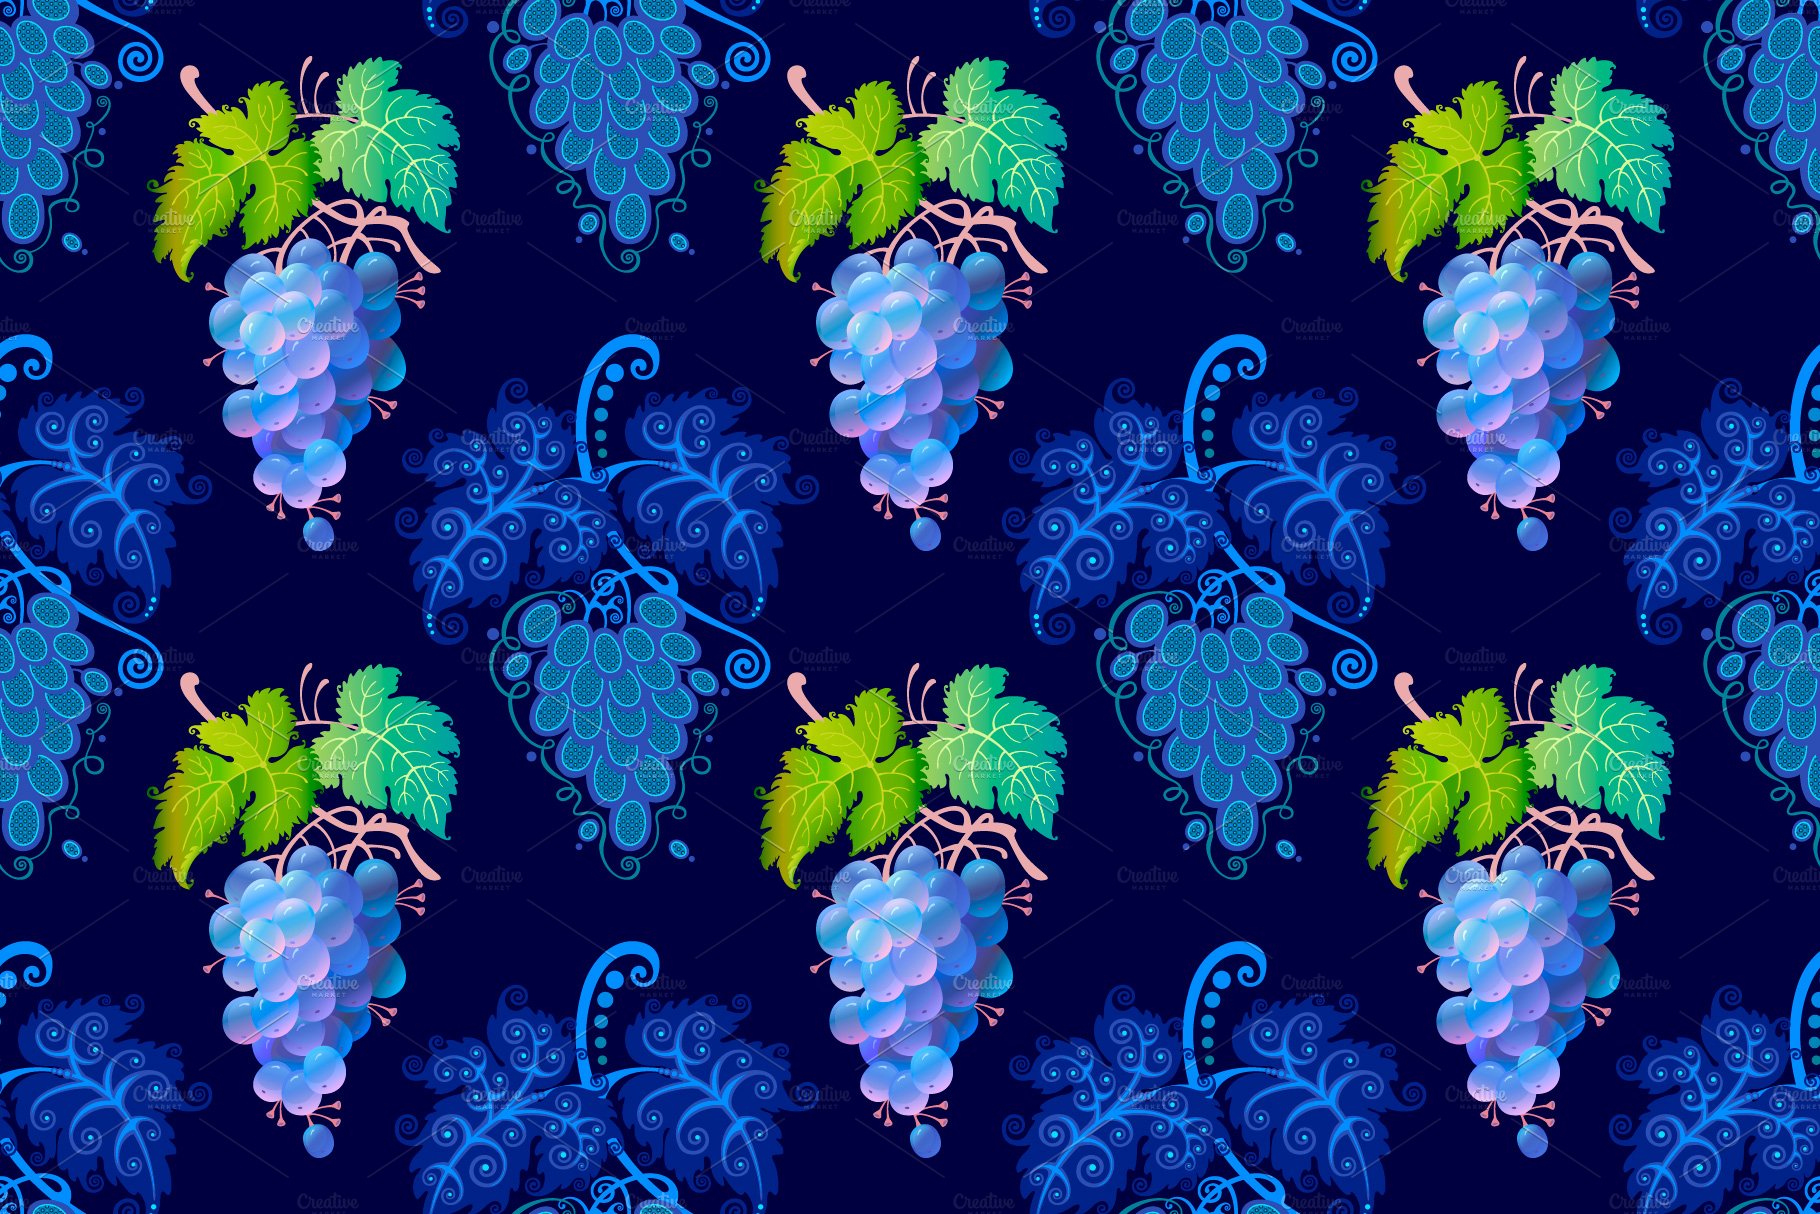 Grapes. Art and pattern cover image.